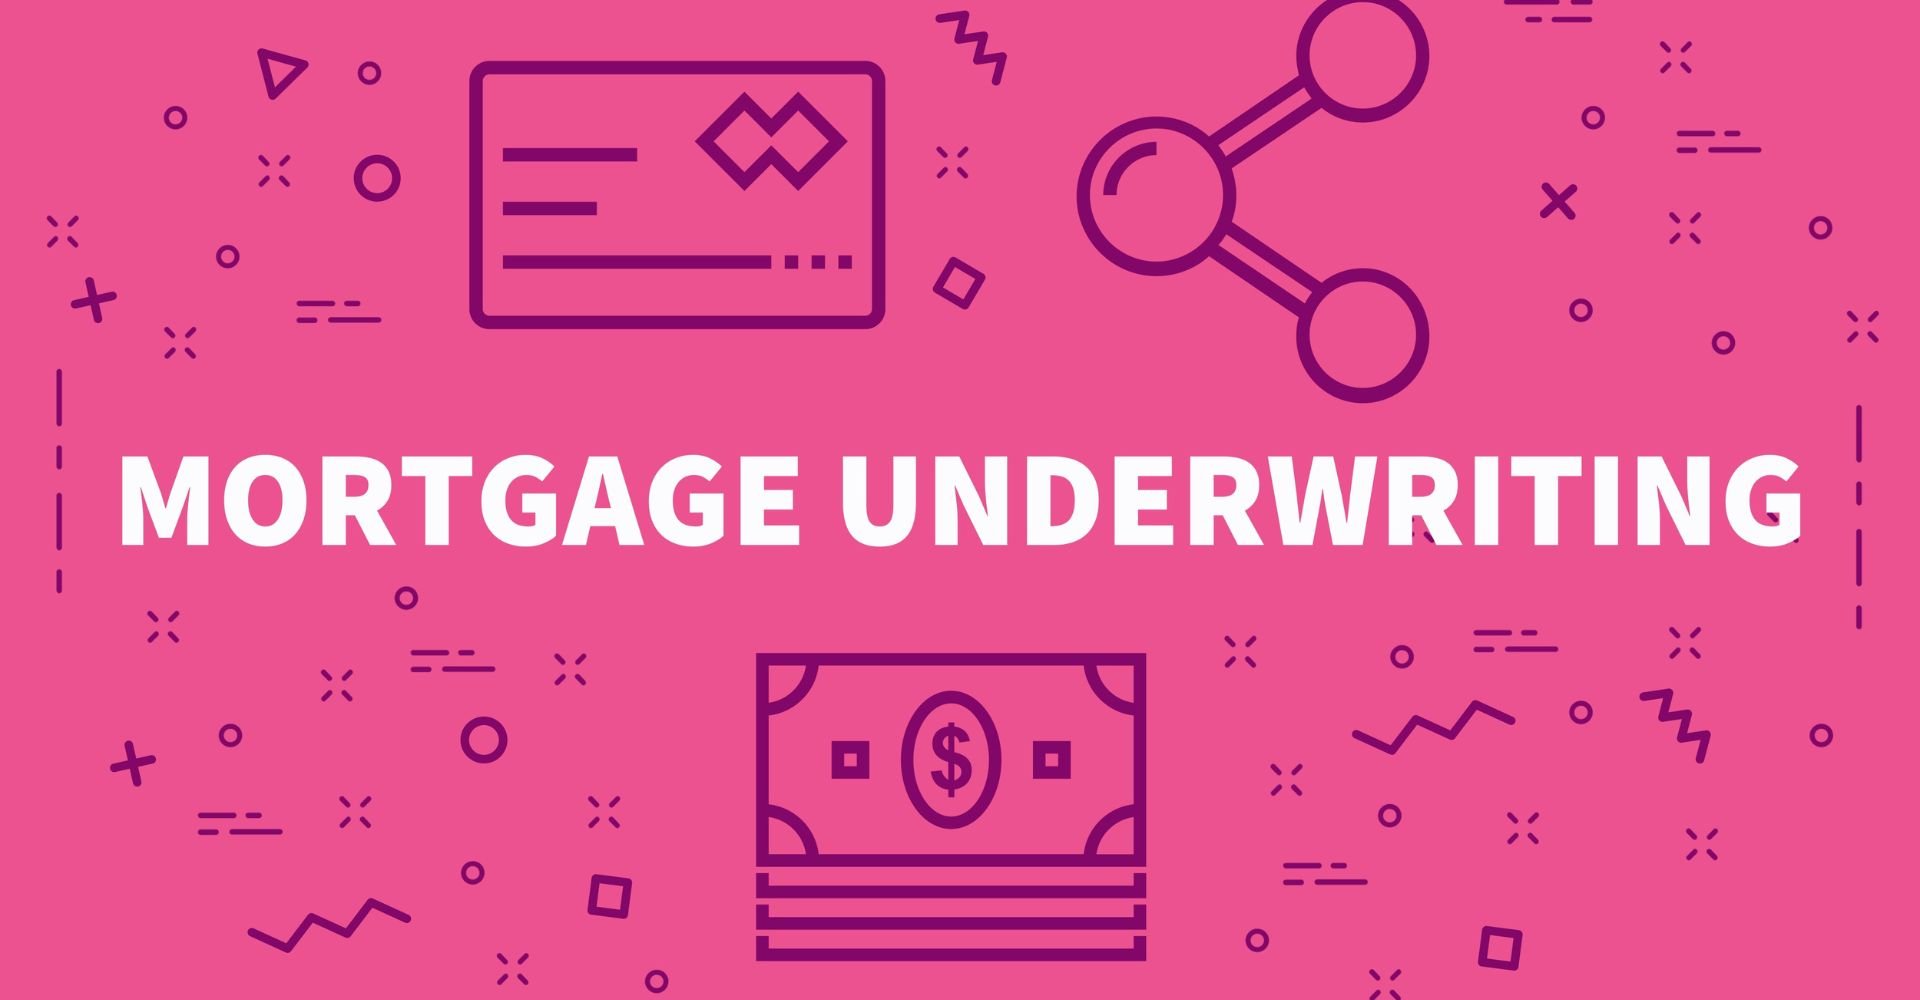 Navigating the journey to homeownership is an exhilarating yet intricate process filled with various steps and considerations. Among these critical steps is the often mysterious world of mortgage underwriting. If you've ever wondered what happens after you submit your mortgage application, you're in the right place. In this comprehensive blog post, we'll dive deep into the mortgage underwriting process. We’ll shed light on what it is, what underwriters do, what aspects are evaluated during underwriting, and the crucial steps involved. Moreover, we'll explore the burning question on every homebuyer's mind: How long does underwriting take? And, to ensure a smooth underwriting process, we'll share valuable tips and insights to help you sail through this critical phase on your path to homeownership. So, let's dive into the world of mortgage underwriting, and help your dream of owning a home take its final steps toward reality. What is Mortgage Underwriting? Mortgage underwriting is the process by which a lender determines whether a borrower is eligible for a mortgage loan. The underwriter will review the borrower's credit history, income, debts, and assets to assess the risk of lending money to the borrower. The underwriting process typically begins with the borrower submitting a loan application. The application will include information about the borrower's income, debts, assets, and credit history. The lender will also order a credit report and an appraisal of the property that the borrower is seeking to purchase. The underwriter will review the borrower's application and supporting documentation to determine the borrower's debt-to-income ratio, credit score, and other factors that affect the risk of lending money to the borrower. The underwriter will also consider the value of the property that the borrower is seeking to purchase and the amount of the loan that the borrower is requesting. Based on the information gathered during the underwriting process, the underwriter will make a decision about whether to approve or deny the loan application. If the loan is approved, the lender will issue a commitment letter to the borrower. The commitment letter will outline the terms of the loan, including the interest rate, loan amount, and repayment period. What Does an Underwriter Do? Mortgage underwriters are responsible for assessing loan applications to determine approval. They work for a lender and evaluate the borrower's financial situation and level of risk. Underwriters analyze income, assets, credit history, and home appraisal to make approval decisions, playing a vital role in the mortgage loan process. They collaborate with Loan Officers to gather required paperwork and information for assessing the borrower's risk level. Additionally, Loan Officers assist in ensuring all necessary documentation is submitted for a smooth process. Key duties of underwriters include the following: Assessing the Home's Value: An appraisal is used to determine the value of the home you want to buy in comparison to the seller's asking price, ensuring that you are not paying more than the home is worth. The underwriter reviews the appraisal to confirm that the home's actual value aligns with the loan amount, reducing the lender's risk and protecting the buyer from overpaying. Evaluating Your Credit History: Lenders rely on your credit history to assess your eligibility and approval for a loan. They consider not only your credit score, but also your current open accounts, late payments, bankruptcies, and credit utilization to gauge your financial habits and history of debt repayment. Confirming Income & Employment: Lenders prefer to see a stable employment history of at least two years in the same position or field before approving a home loan. This demonstrates a reliable source of income to support your monthly mortgage payments. Additionally, they verify that your stated income on the application aligns with your actual earnings to ensure loan repayment ability. Assessing Down Payment & Savings: Before loan approval, the underwriter checks that you have sufficient funds for the property's down payment and reviews your savings to cover additional expenses like closing costs. Some loans, such as VA loans for eligible veterans and active-duty service members, may not require a down payment, in which case the underwriter does not verify this specific requirement. Ultimately, underwriters determine loan approval, making it important to facilitate the process by providing timely and accurate documentation after making an offer on a home. What is Evaluated During the Underwriting Process? As we’ve mentioned, underwriters evaluate your finances, credit history, and the property you wish to purchase to determine the lender’s risk level to decide whether to approve your loan application. During the underwriting process, underwriters review three critical areas, called the 3 C’s of underwriting. These include: Capacity Capacity is the ability to repay a loan based on factors such as employment history, income, debt, and assets like savings and investments. Income is crucial as it indicates the amount earned monthly and its reliability. Sufficient income is necessary to cover monthly mortgage payments, and various documents are required to verify income for underwriters. The specific documents needed depend on the type of mortgage home loan. Conventional loans typically requiring pay stubs, W2s, and tax returns. Non-QM mortgages like bank statement loans only need bank statements. Self-employed individuals or business owners may need alternative documentation like profit and loss statements and personal and business tax returns. Underwriters aim to ensure that reported income matches actual earnings and verify employment stability, often requiring proof of at least two years in the same job or field. Self-employed individuals may need to provide additional information, such as multiple years of tax returns and business licenses. Credit Credit plays a crucial role in the loan approval process as it is used to assess the borrower's reliability in repaying the loan. Lenders assess credit reports to ensure timely payments, debt settlement, and the number of open credit lines. Credit scores are significant as they indicate the borrower's creditworthiness, with a good score reflecting a history of timely debt repayment. Moreover, the credit report provides insight into the borrower's debts, allowing lenders to calculate the Debt-to-Income (DTI) ratio by comparing it to their pre-tax income. While most lenders prefer a DTI below 50%, the specific requirement may vary depending on the lender and loan type. A high DTI can raise concerns for lenders as it suggests existing high debt, making it more challenging to repay a mortgage loan. Collateral The property itself serves as the collateral for a home loan, and underwriters verify that the home's value aligns with the loan amount to secure it as collateral in case of missed mortgage payments. The appraisal is essential for lenders to recoup unpaid balances in the event of default. Thus, the underwriter carefully evaluates the appraisal to determine the true value of the home and compare it to the home’s selling price. If these values do not align,the loan may be denied. For example, if a home is appraised at $375,000 but has an asking price of $450,000, it probably isn’t a wise pruchase. This would diminish the home's suitability as collateral due to its lower value compared to the appraisal. Steps in the Mortgage Underwriting Process The underwriting process takes place after you’ve submitted your mortgage application. The application process varies by lender. You’ll be asked to provide various pieces of documentation and information to help the underwriter get started. To give you more insight into the mortgage approval process, here are the steps of the underwriting process: 1. Mortgage Pre-Approval Obtaining a mortgage pre-approval is the initial step in the home buying process. It provides insight into the likelihood of being approved for a home loan. It's important to note that pre-approval is not the same as final approval. Being pre-approved does not guarantee approval for the actual loan or a specific amount. However, it does enhance your purchasing power and sets you apart from other buyers in a competitive market. During the pre-approval process, the lender assesses your income, debts, and credit history. While some documentation is typically required for pre-approvals, the process is not as thorough as the actual loan application. The purpose of pre-approval is for lenders to ensure that you have sufficient income to repay the loan. Pre-approval should take place prior to beginning your search for a home. Sellers will take buyers with mortgage pre-approval more seriously, as it’s indicative of their intent to buy a home. With mortgage pre-approval, you’ll have an indication of the likelihood of loan approval. You’ll also know the maximum amount you can borrow from that particular lender. Skipping this step is a common first-time homebuyer mistake. 2. Income & Asset Verification In order to pre-approve you for a loan, lenders need to confirm your income and assets by examining pay stubs, tax returns, W2s, and bank statements to make sure you have enough income to cover the loan. They will also assess your liquid assets to ensure that if your income is not sufficient to cover the mortgage, you have savings that can be used. Once the lender has assessed your eligibility for a loan, they will provide you with a pre-approval letter stating the maximum amount for which you have been pre-approved. 3. Application & Appraisal After finding your ideal home, you will need to complete a mortgage application for that property. The information you provide will determine your eligibility for a loan based on factors such as income, debt, credit history, and the appraised value of the home. This marks the beginning of the underwriting process, during which you will be required to submit various financial documents to demonstrate your ability to repay the loan. As previously mentioned, these documents may include W2s, pay stubs, tax returns, and bank statements to help underwriters verify your income. However, your Loan Officer may reach out to you if additional information is needed. Once your underwriter has examined your documents, they will then review the home's appraisal to confirm its true value and compare it to the purchase price. The primary goal of your lender is to ensure that the loan amount does not exceed the appraised value. In the event you default, they would need to sell the property to recover their investment. The appraisal also provides assurance to borrowers that they are not paying more for a home than its actual worth. 4. Title Search & Title Insurance The process of title search and insurance is essential for lenders to verify that they are not providing a loan for a property that is legally owned by someone else. Ultimately, it is necessary to ensure that the property can be legally transferred to the borrower. A mortgage underwriter or title company conducts thorough research on the property to identify any existing mortgages, claims, liens, zoning ordinances, legal disputes, unpaid taxes, or other issues that could hinder the transfer of the title to a new owner. Upon completion of the title search, the title company issues an insurance policy to guarantee the results and provide protection for both the lender and the property owner. 5. Underwriting Decision After gathering all necessary information, the underwriter will assess the lender's risk and make a decision regarding the approval of a loan for a specific property. They can also assist in determining the most suitable loan type for the borrower, including adjustable- or fixed-rate mortgage loans, conventional or Non-QM loans, and more. At this stage, several outcomes are possible. Your loan may be approved, denied, placed on hold, or conditionally approved pending additional requirements. Let's examine the implications of each of these possibilities: Approved: Being approved for a mortgage loan is the most favorable outcome. Once the loan is approved, you can proceed to close on the property and become a homeowner. At this stage, there is no need to provide the lender with any further information, and you can schedule a closing appointment. Denied: Your mortgage application may be rejected by the lender for various reasons. Often, it is due to the borrower or the property not meeting their specific loan requirements. For instance, if you have poor credit or insufficient income for the loan, the lender may deny the application. You will usually receive a specific reason for the denial to guide your next steps. For example, if the denial is due to poor credit, you will need to work on improving your credit score before reapplying. If this occurs, you may have options such as reapplying at a later time, seeking a lower loan amount, or making a larger down payment. Suspended or pending: Your mortgage application might be put on hold or pending if you have not provided the underwriter with sufficient information or documentation to accurately verify the details on your application. Your application can be suspended if the underwriter is unable to assess your financial situation. You can reactivate your application by providing the necessary documentation to the underwriter. Approved with conditions: Some approvals come with conditions. In these cases, you are technically approved but cannot proceed with closing until you provide the underwriter with additional information or documentation. This type of approval usually means that more information is required from you for the application to be fully approved. Ultimately, in these instances, you are approved, but the lender is conducting thorough checks to confirm the information they have. How Long Does Underwriting Take? The mortgage underwriting process can range from a few days to a few weeks, depending on factors such as the need for additional information, the lender's workload, and the efficiency of their practices. This step is often the most time-consuming part of buying a home, contributing to the length of the closing timeline. By promptly providing required documents and information, you can help expedite the closing process. The type of underwriting used also affects the timeline. Automated underwriting is generally faster, but may not be suitable for borrowers with unique financial situations. In such cases, manual underwriting may be more appropriate. Some lenders use a combination of both methods to assess risk. It's important to note that underwriting is just one aspect of the entire lending process, and it typically takes 40-50 days to complete the loan closing process. Tips for a Smooth Mortgage Underwriting Process 1. Have Documents & Paperwork Organized To ensure a smooth mortgage underwriting process, it's important to have all your financial documents organized before applying for a loan. Prior to applying, aim to have the following prepared: Employment details from the last two years (for self-employed individuals, this includes business records and tax returns) W-2 forms from the previous two years Pay stubs from at least 30 to 60 days before applying Account information, such as checking, savings, money market, CDs, investment accounts, and retirement accounts Additional income details, including alimony, child support, annuities, bonuses, commissions, dividends, interest, overtime pay, pensions, or Social Security payments A gift letter if you've received funds from friends or relatives for your down payment 2. Improve Credit Score Having a lower credit score may pose challenges in getting approved for a mortgage and can lead to higher interest rates on your loan. To enhance your creditworthiness, consider: Paying down existing debts Don’t apply for new loans or credit cards Enhancing your debt-to-income ratio (strive for < 36%) Reviewing your credit report and contesting any inaccuracies 3. Make Larger Down Payment The mortgage underwriter also takes into account the loan-to-value ratio (LTV) of your transaction: the amount of money you are borrowing, also known as the loan principal, divided by the value of the property you wish to purchase. A higher LTV ratio indicates that the lender could face greater potential losses if you default on the mortgage. You can lower your LTV by making a larger initial down payment. The larger the down payment, the easier it may be to qualify - because you are requesting to borrow a smaller amount. Do not hesitate to seek assistance from family or friends, or explore down payment assistance programs. Check out our tips on how to find extra down payment money. Wrapping Up Our Guide to The Mortgage Underwriting Process The mortgage underwriting process is an essential step for most homebuyers when purchasing a home. This process allows lenders to thoroughly examine your financial situation to determine the likelihood of you repaying the loan. Being prepared with all necessary documents and promptly responding to any lender inquiries can help expedite the underwriting process and move you into your new home more quickly. To learn more about buying a home or if you have questions that weren’t addressed in this post, give us a call at (817) 923-7321 or contact us. Helen Painter Group Realtors is here to offer our knowledge and expertise to help facilitate your home buying journey. A long-standing and trusted Fort Worth real estate agency, we’ve been serving buyers and sellers since 1958. With over six decades of success behind us, you'll have peace of mind knowing your best interests are being represented throughout the home buying process.